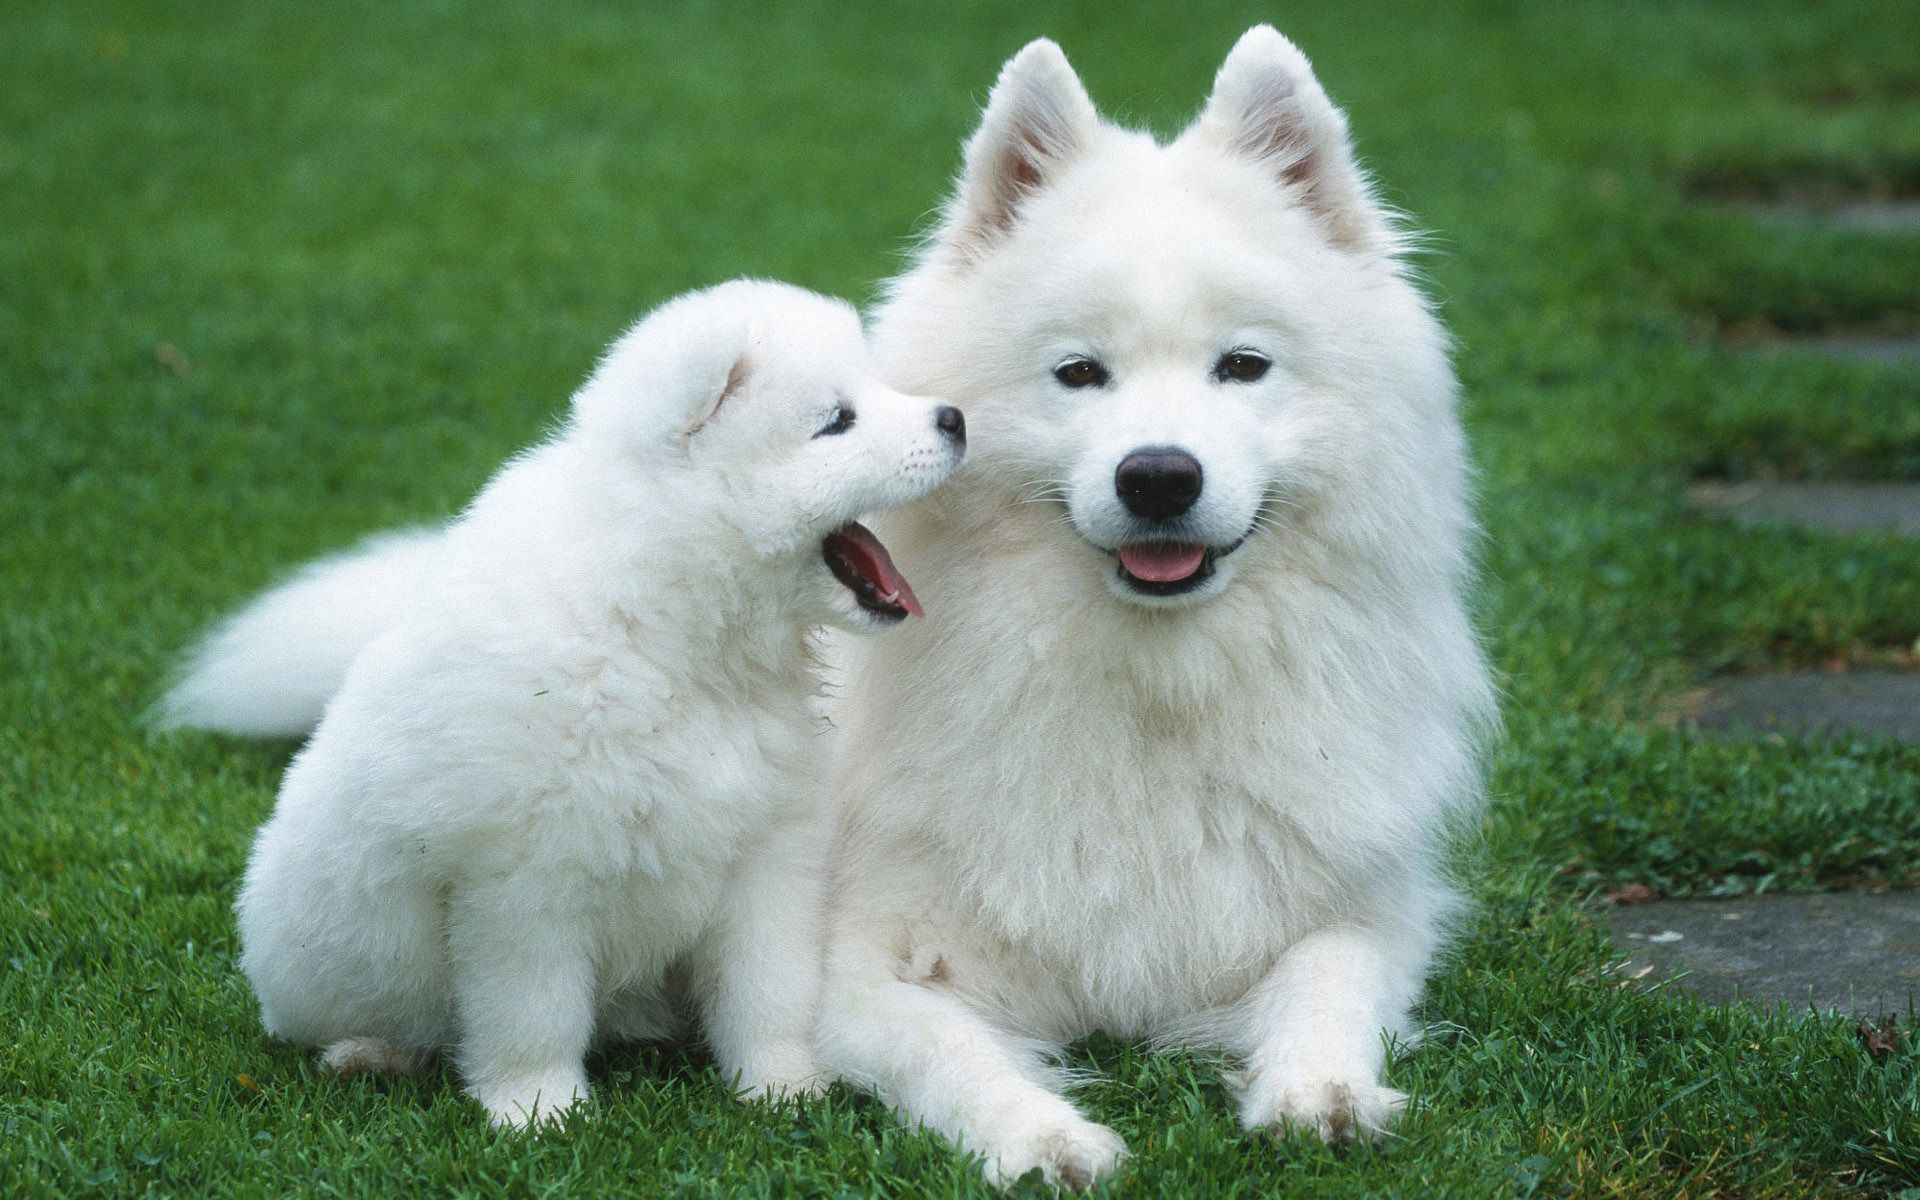 Dog with a puppy wallpapers and images - wallpapers, pictures, photos